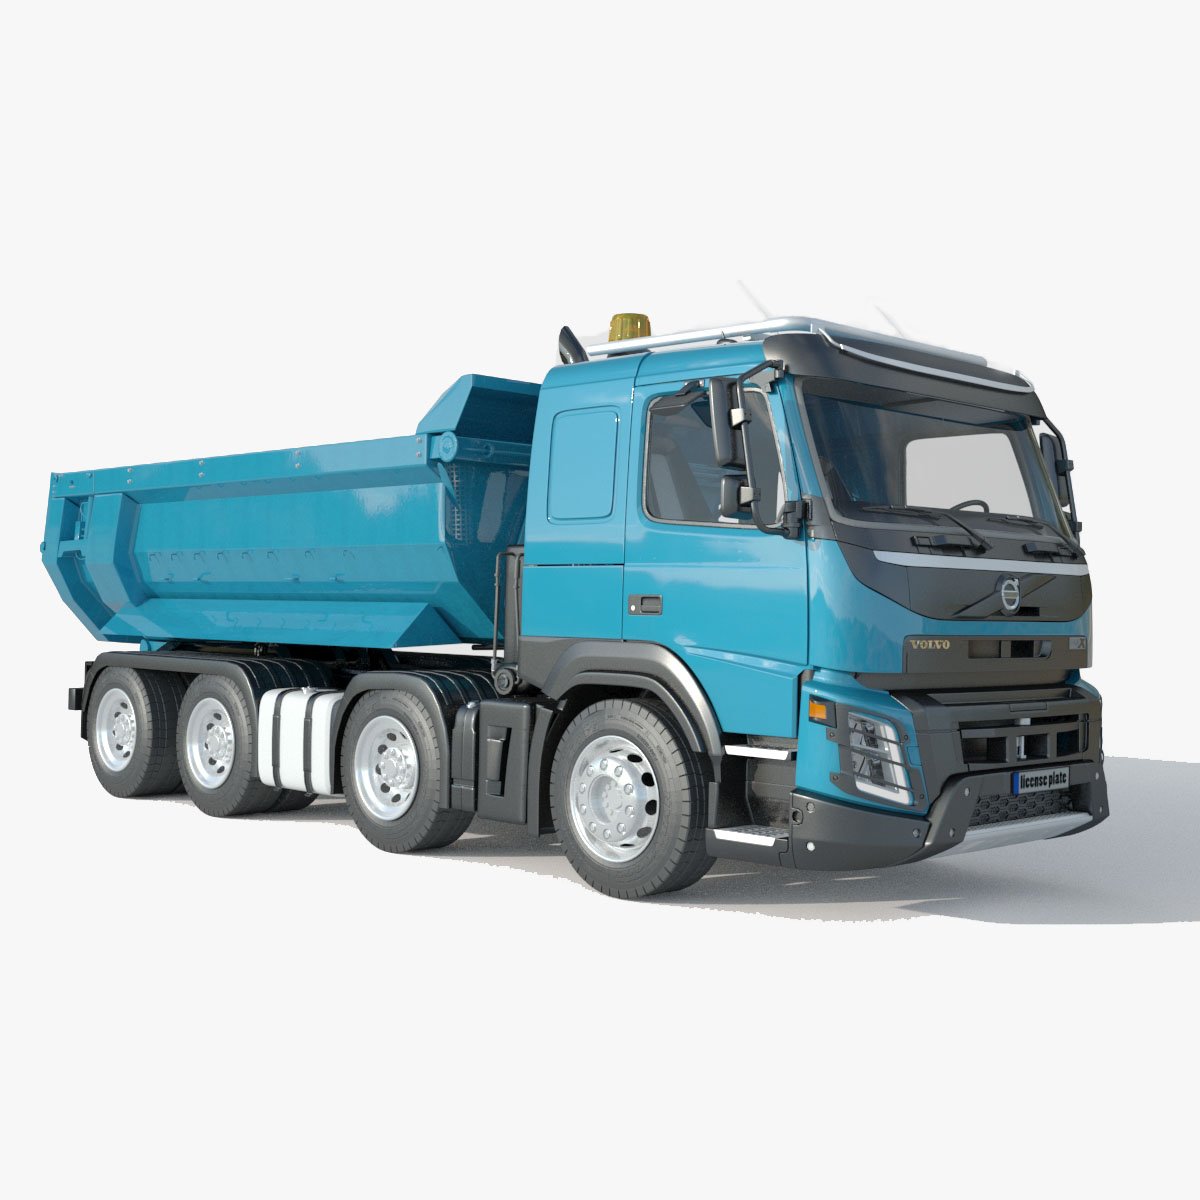 Volvo FMX 500 6x4 Three-Way Tipper Truck (2019) Exterior and